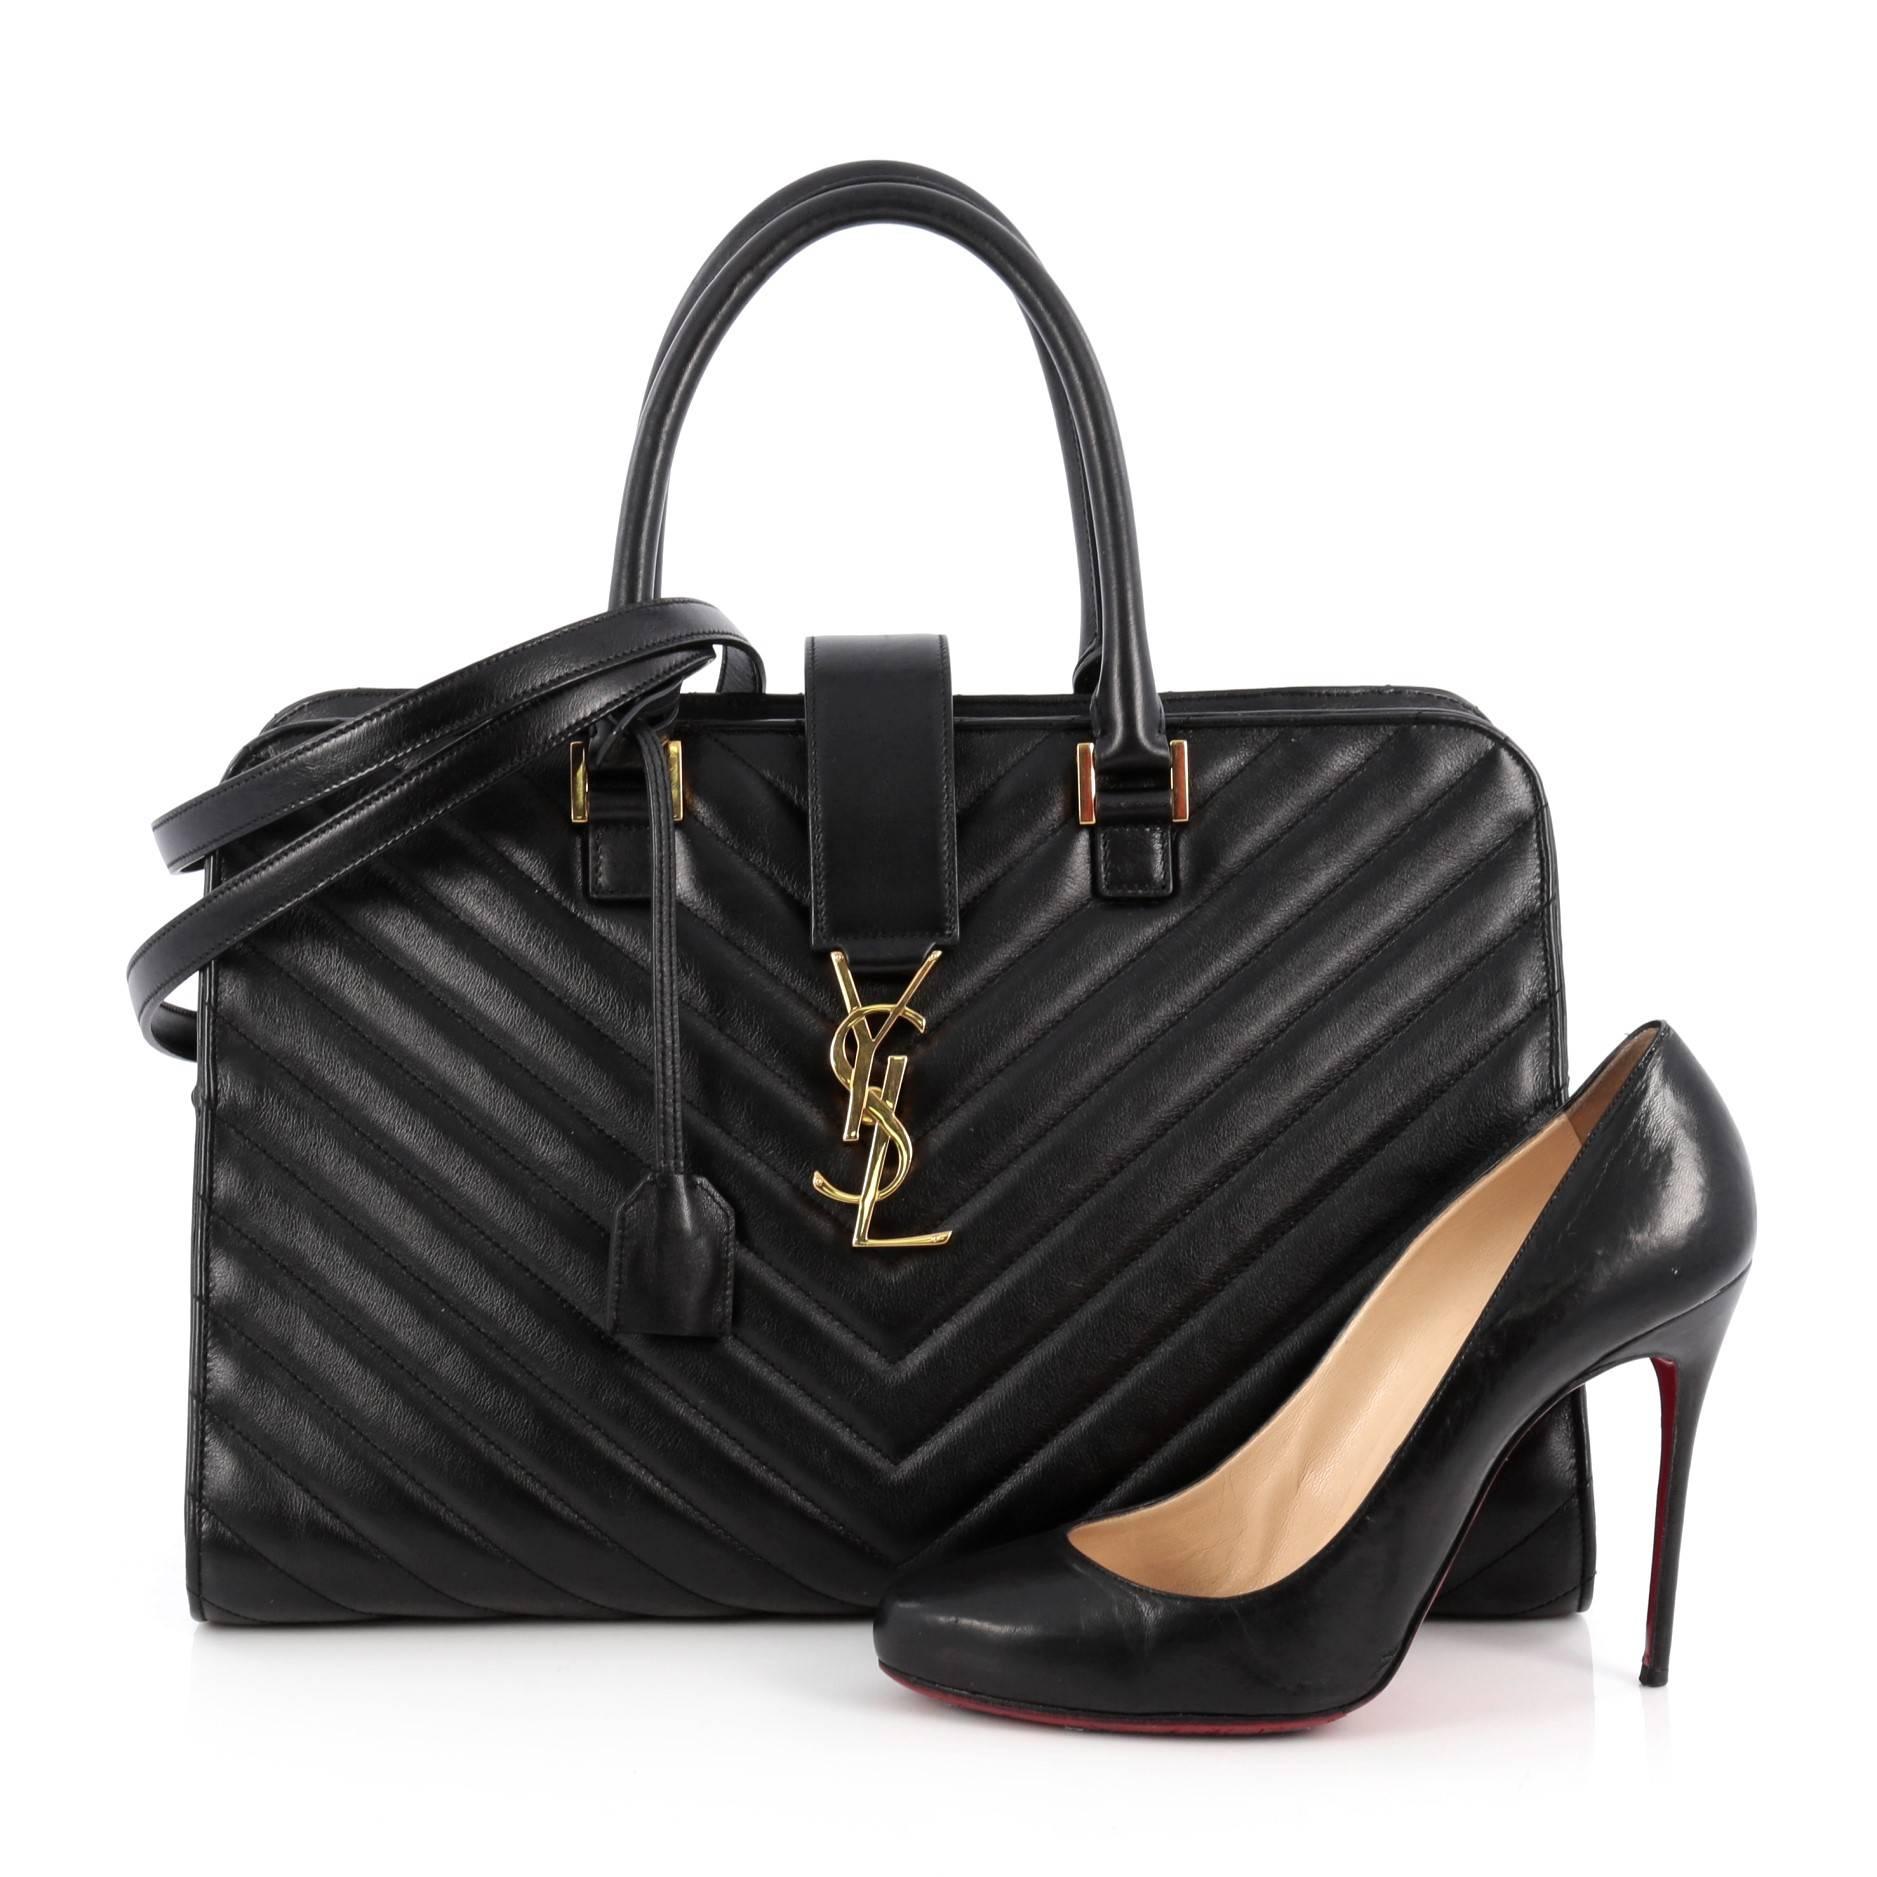 This authentic Saint Laurent Monogram Cabas Matelasse Chevron Leather Medium combines a modern and functional style with an edgy twist. Crafted in black quilted matelasse leather, this boxy, satchel features dual-rolled handles, YSL metal logo at